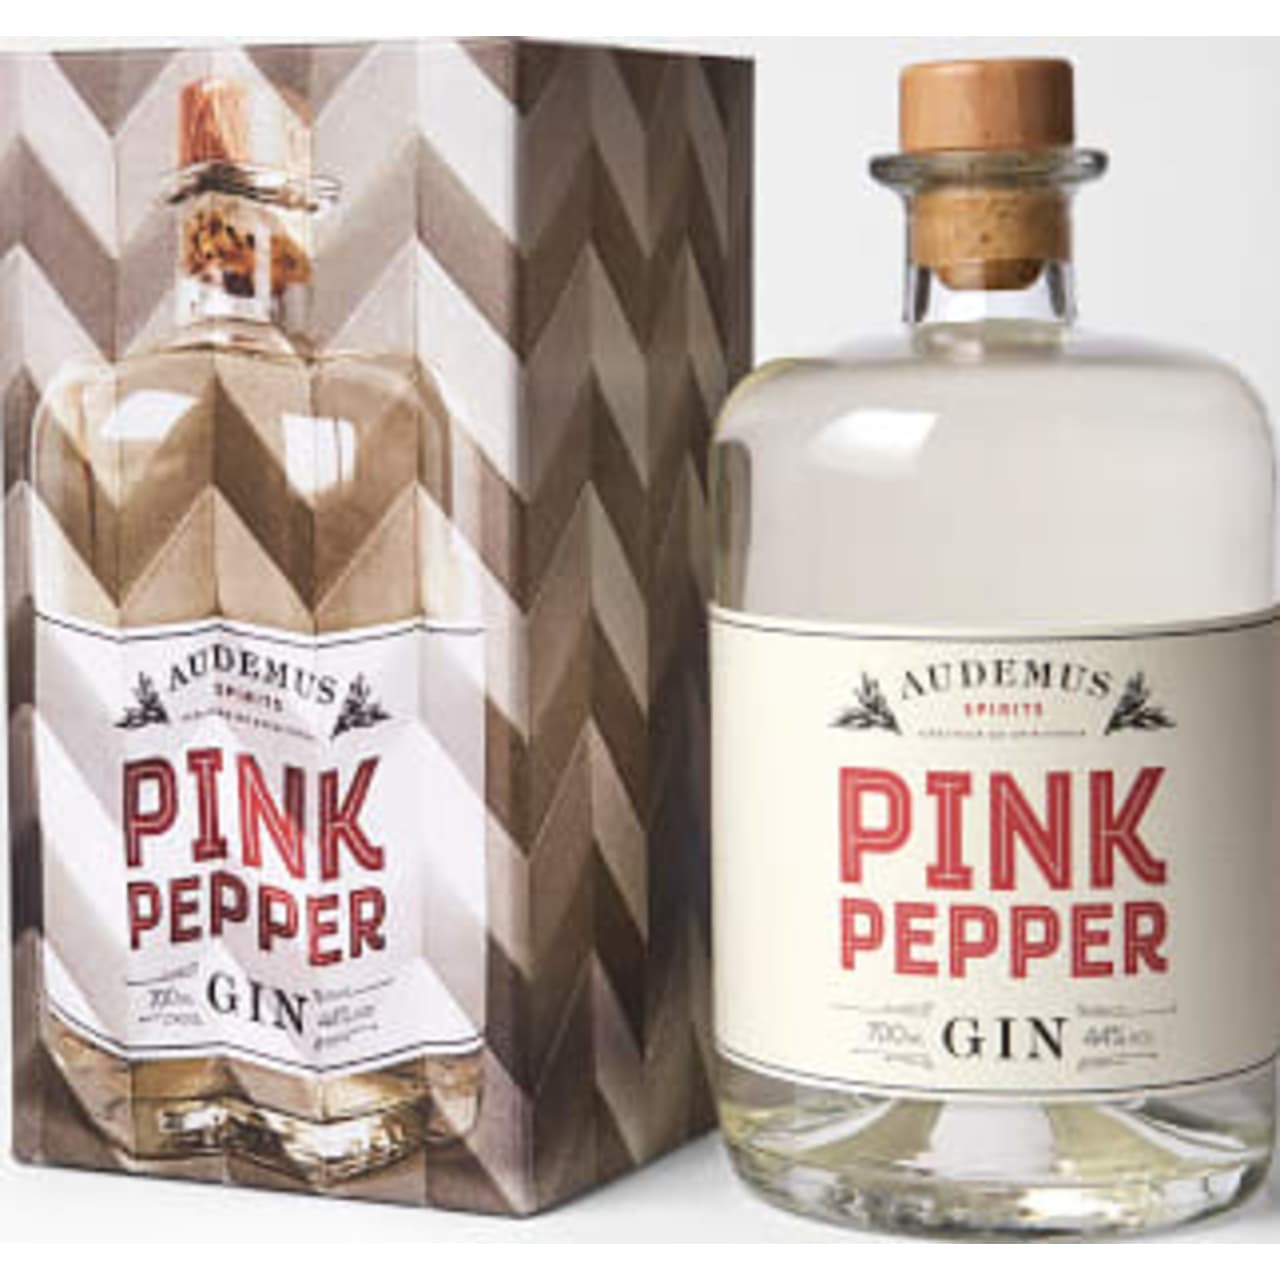 Product Image - Audemus Pink Pepper Gin Gift Pack